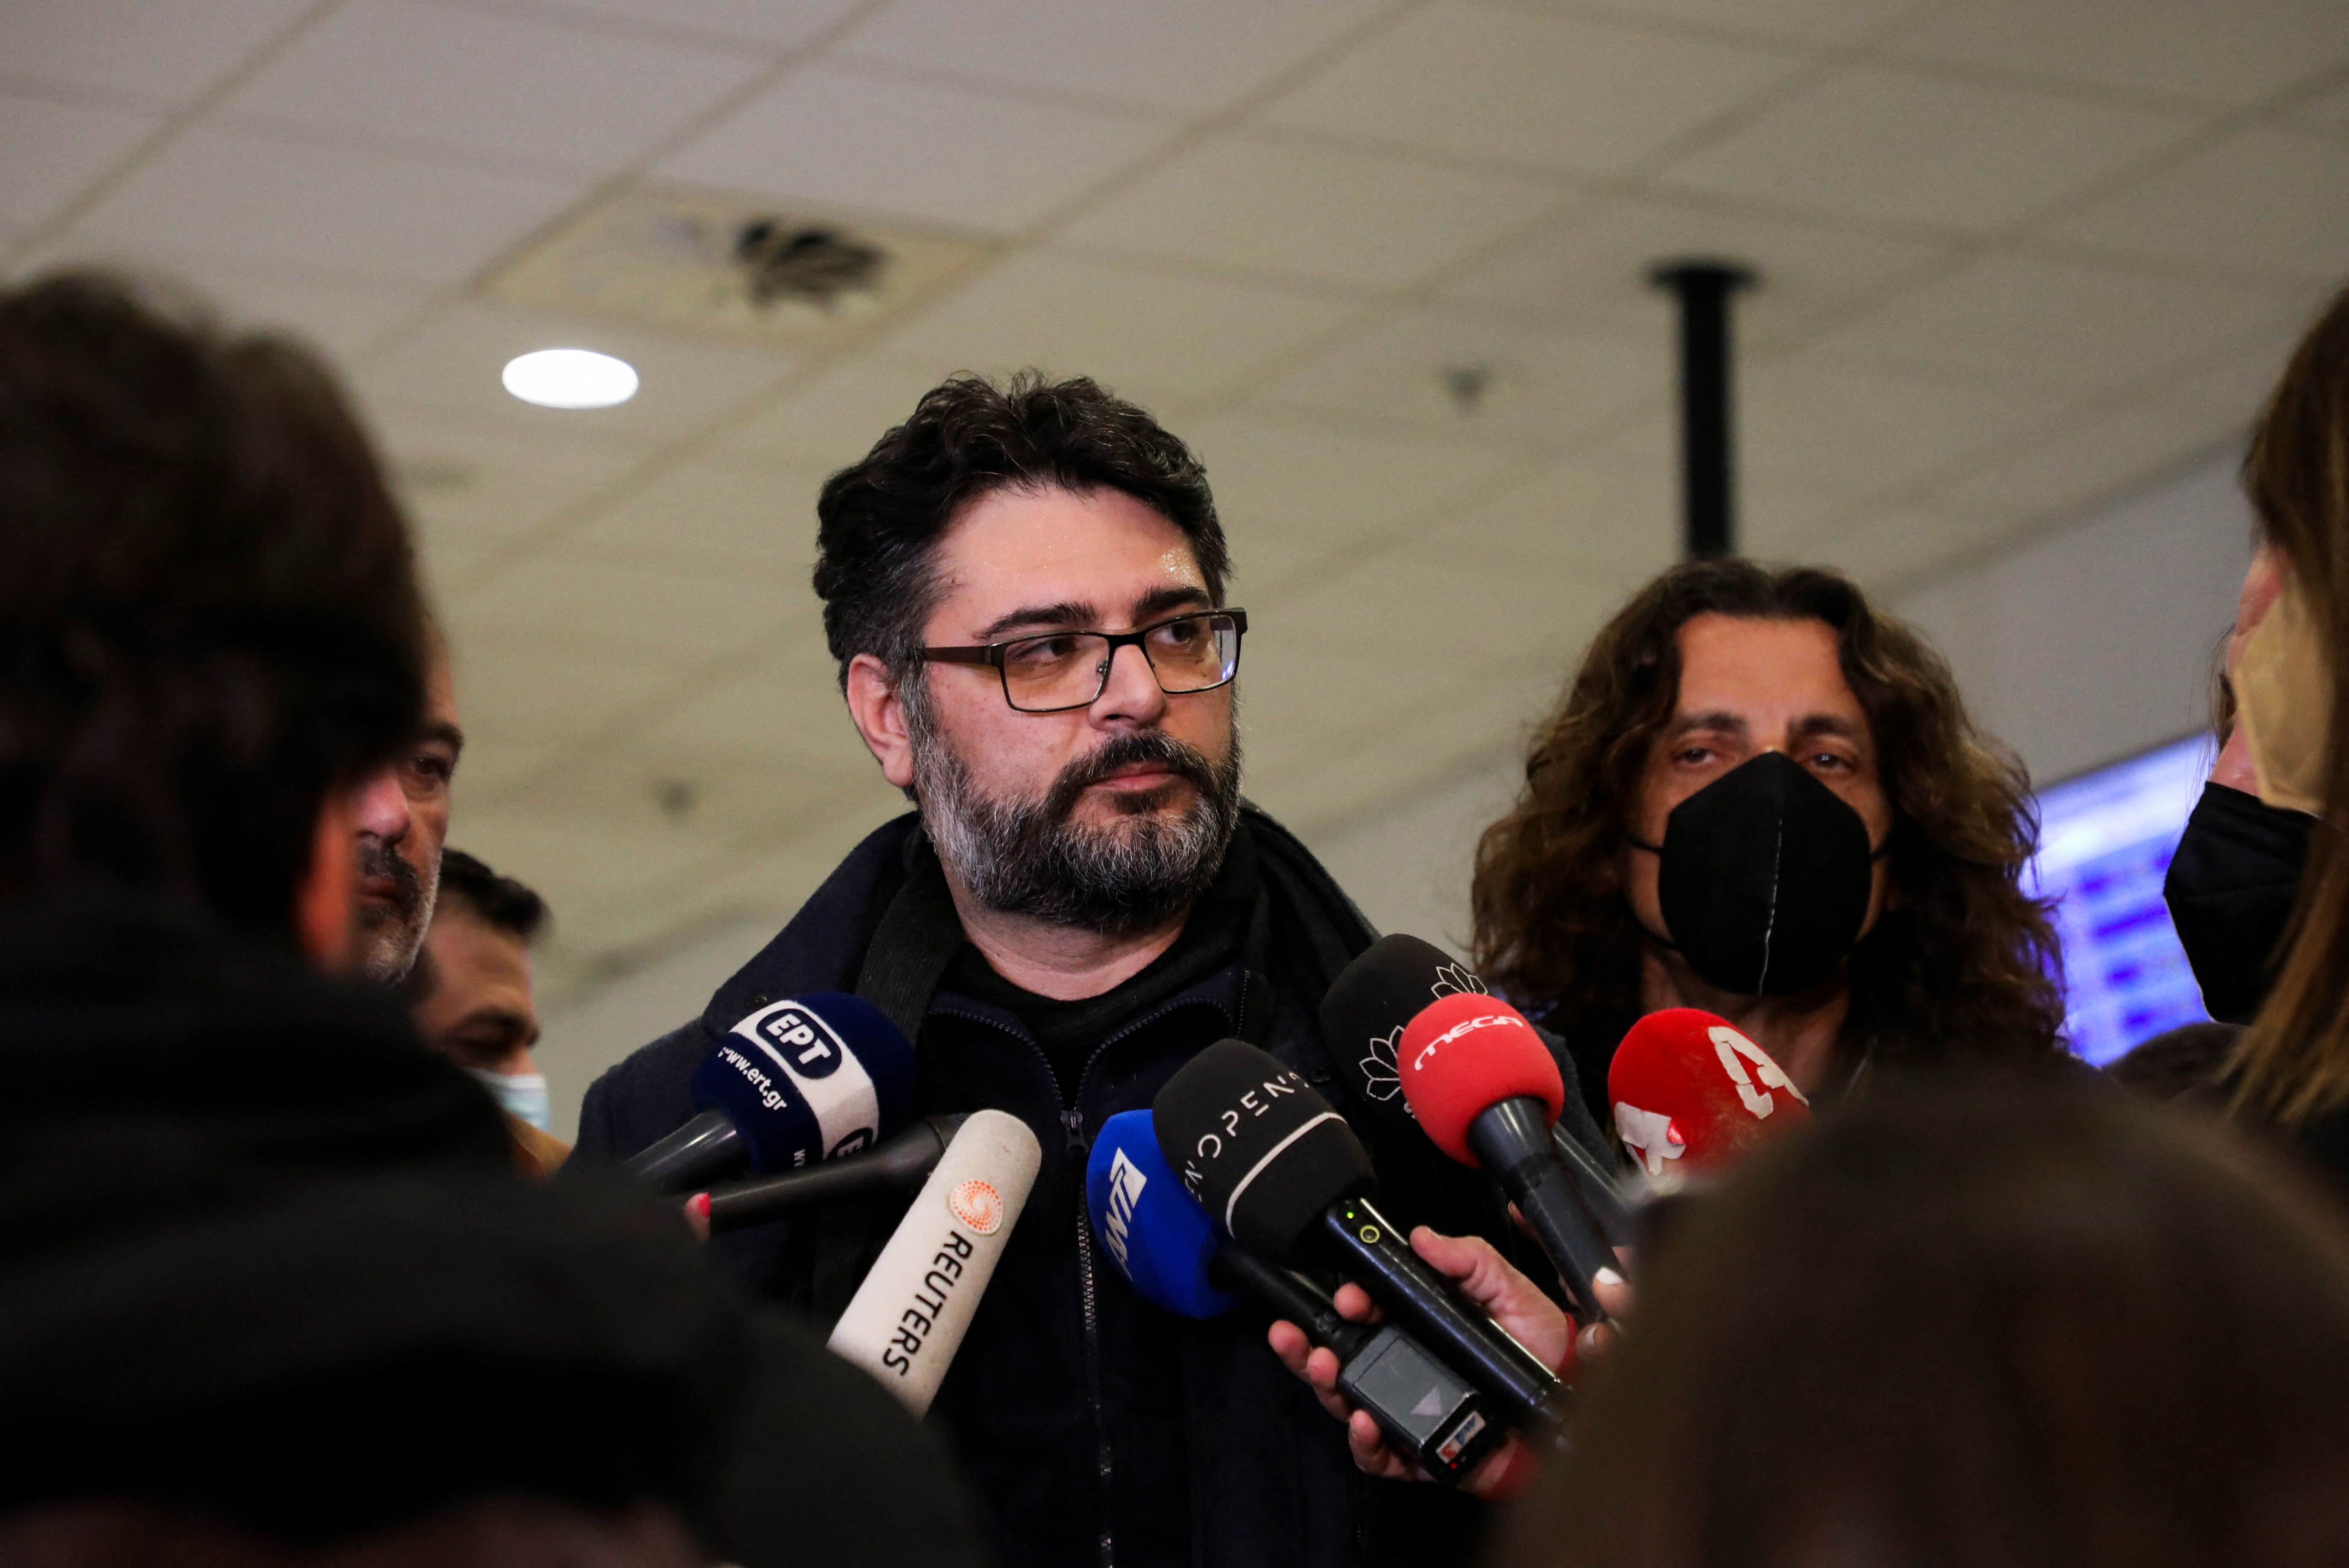 Greece's Consul General Manolis Androulakis talks to the media after arriving back in Greece by plane from Romania after evacuating the city of Mariupol, Ukraine on March 15 and arriving in Athens, Greece, on March 20.